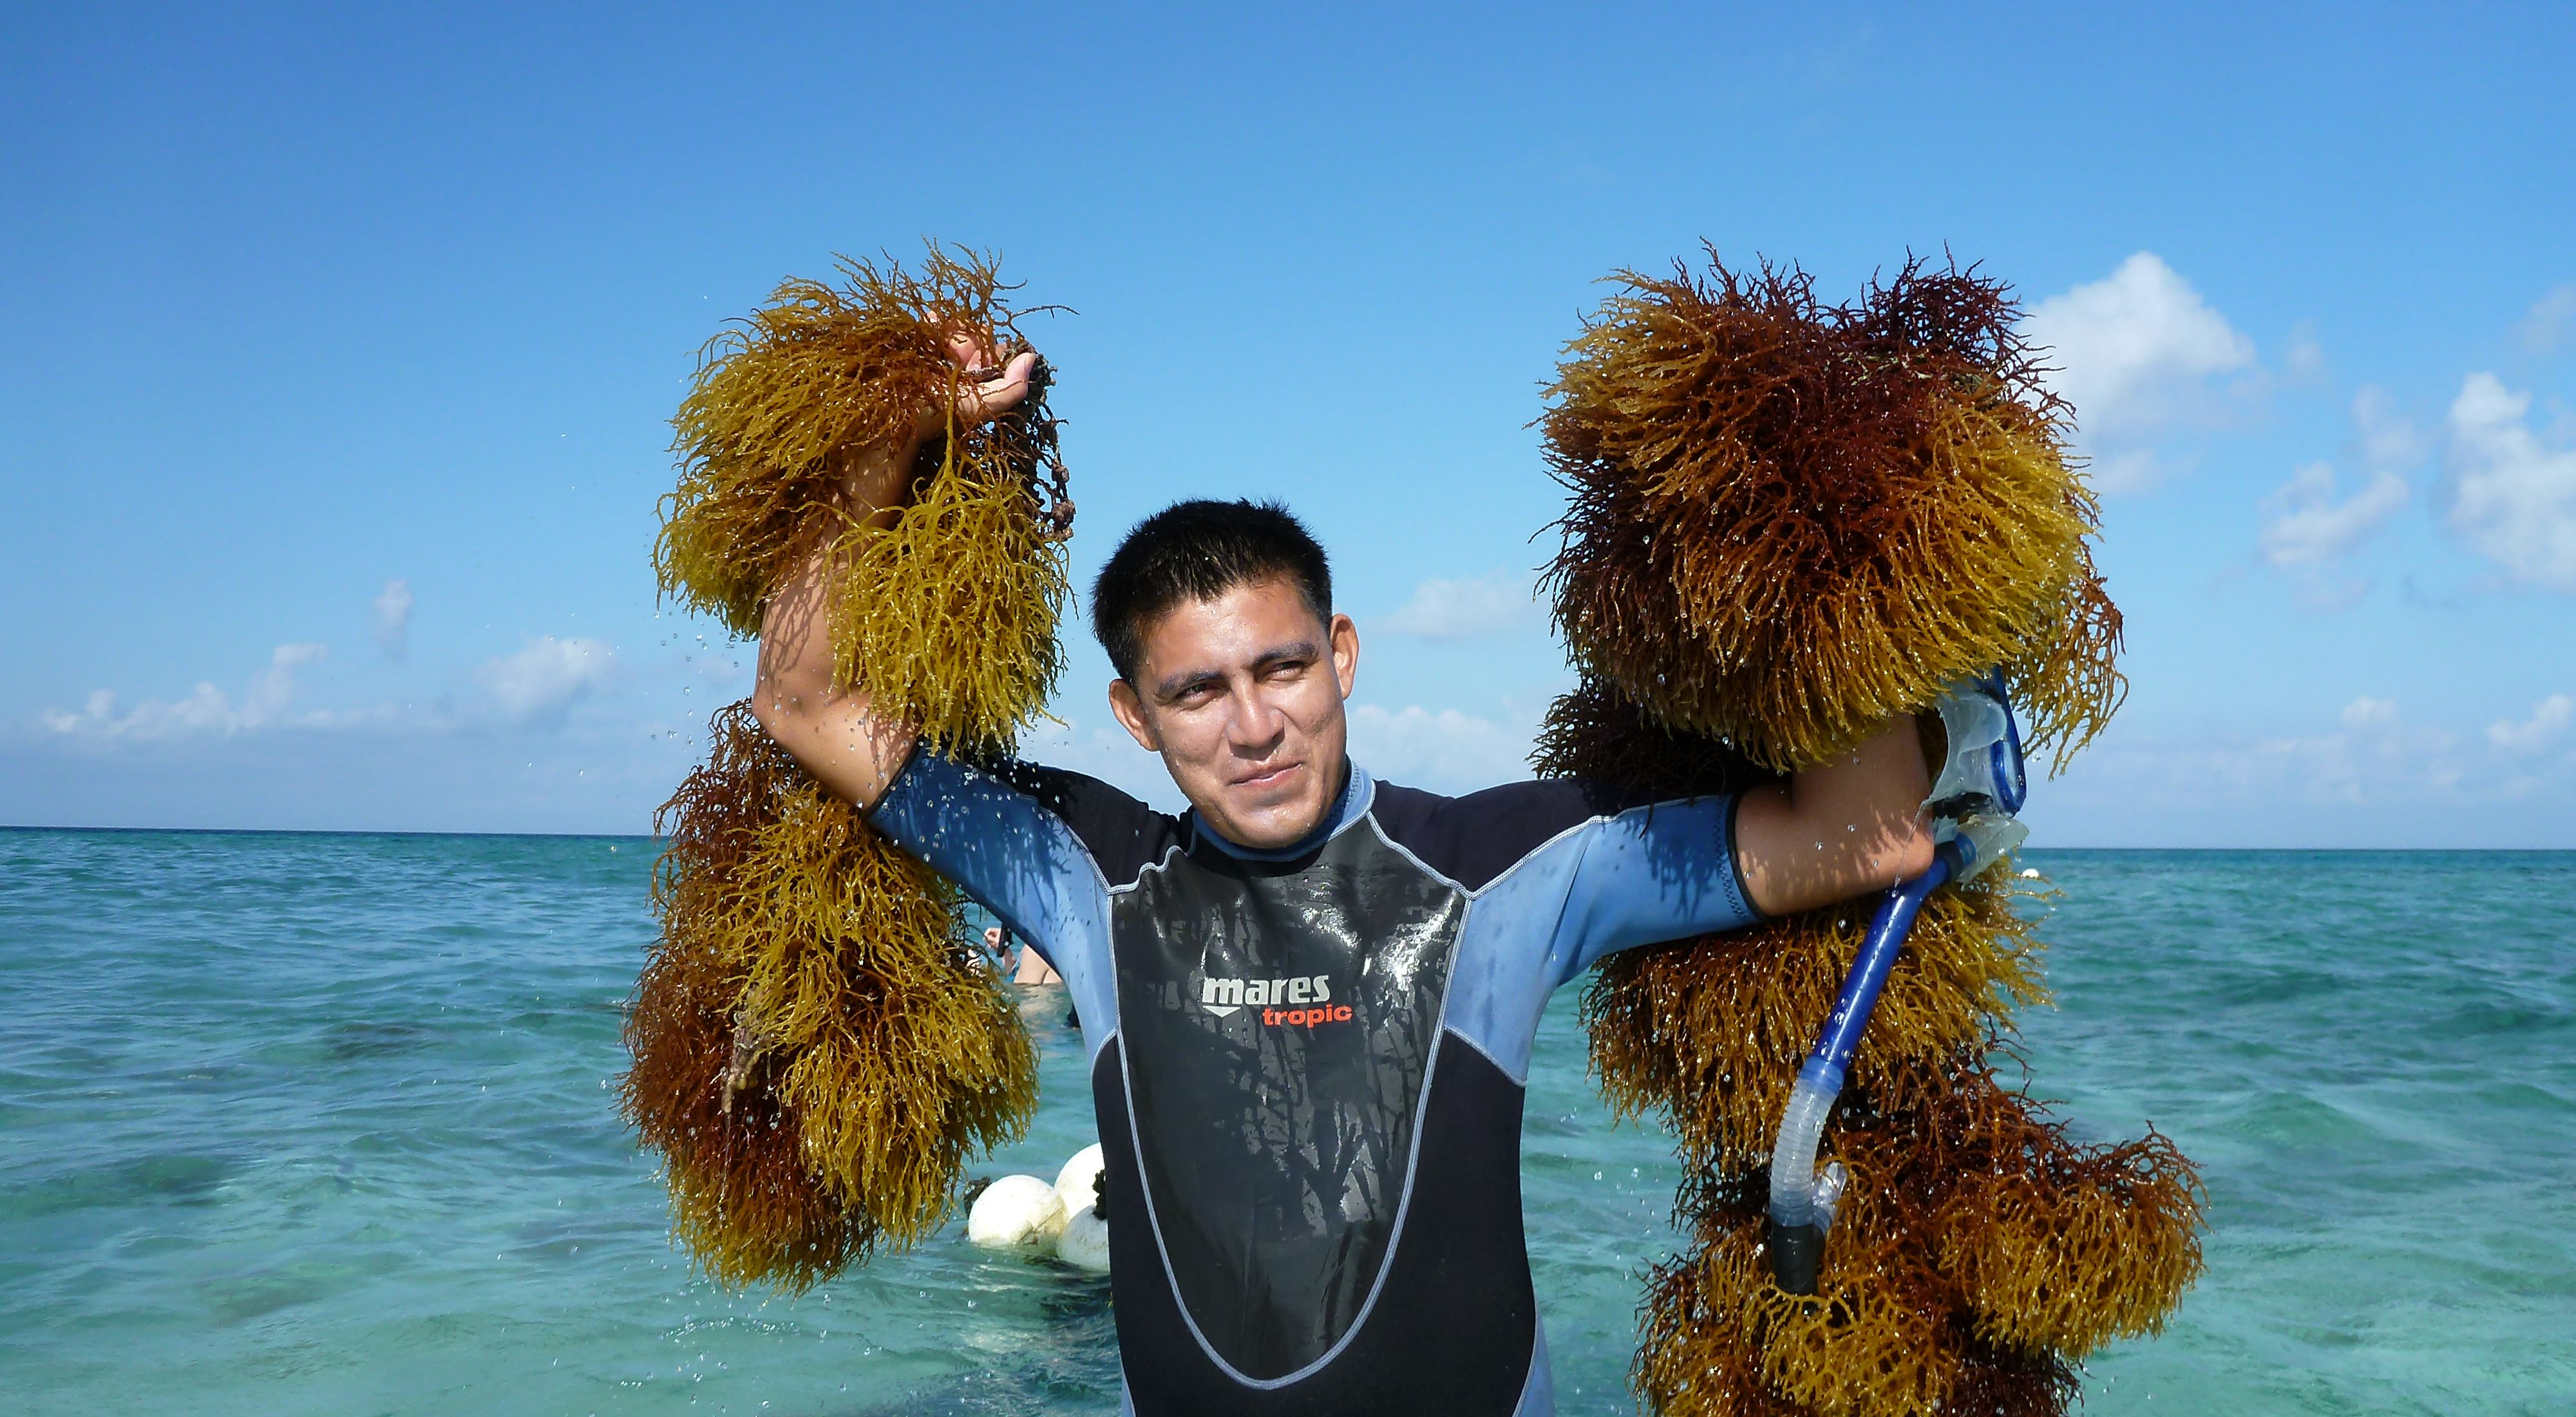 A person in a wet suit - half in water - smiles and holds up harvested seaweed in his hands.